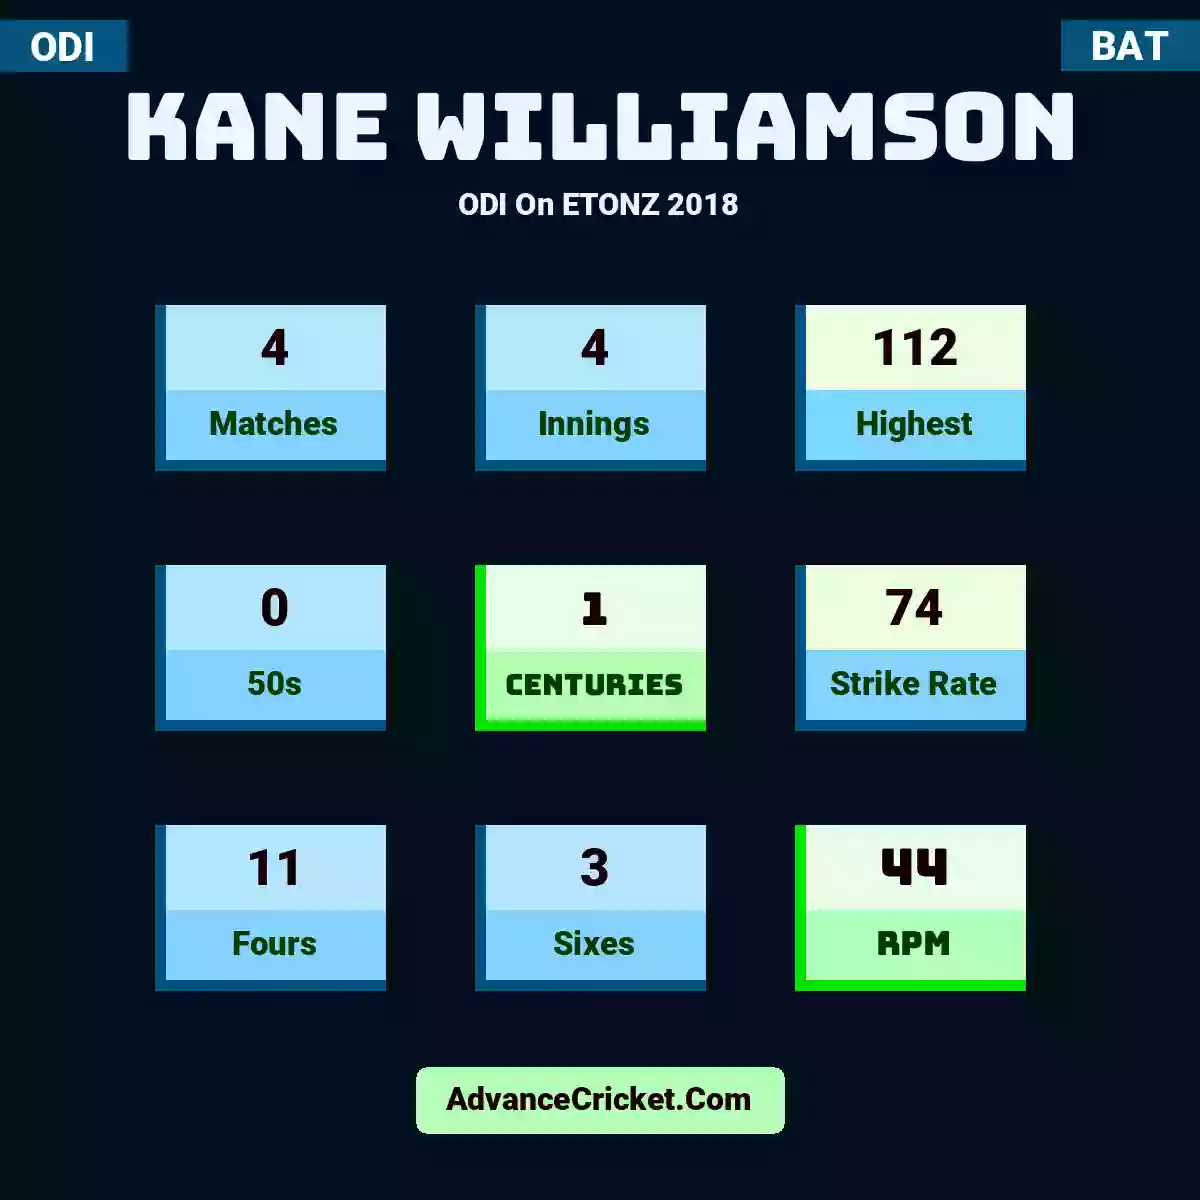 Kane Williamson ODI  On ETONZ 2018, Kane Williamson played 4 matches, scored 112 runs as highest, 0 half-centuries, and 1 centuries, with a strike rate of 74. K.Williamson hit 11 fours and 3 sixes, with an RPM of 44.